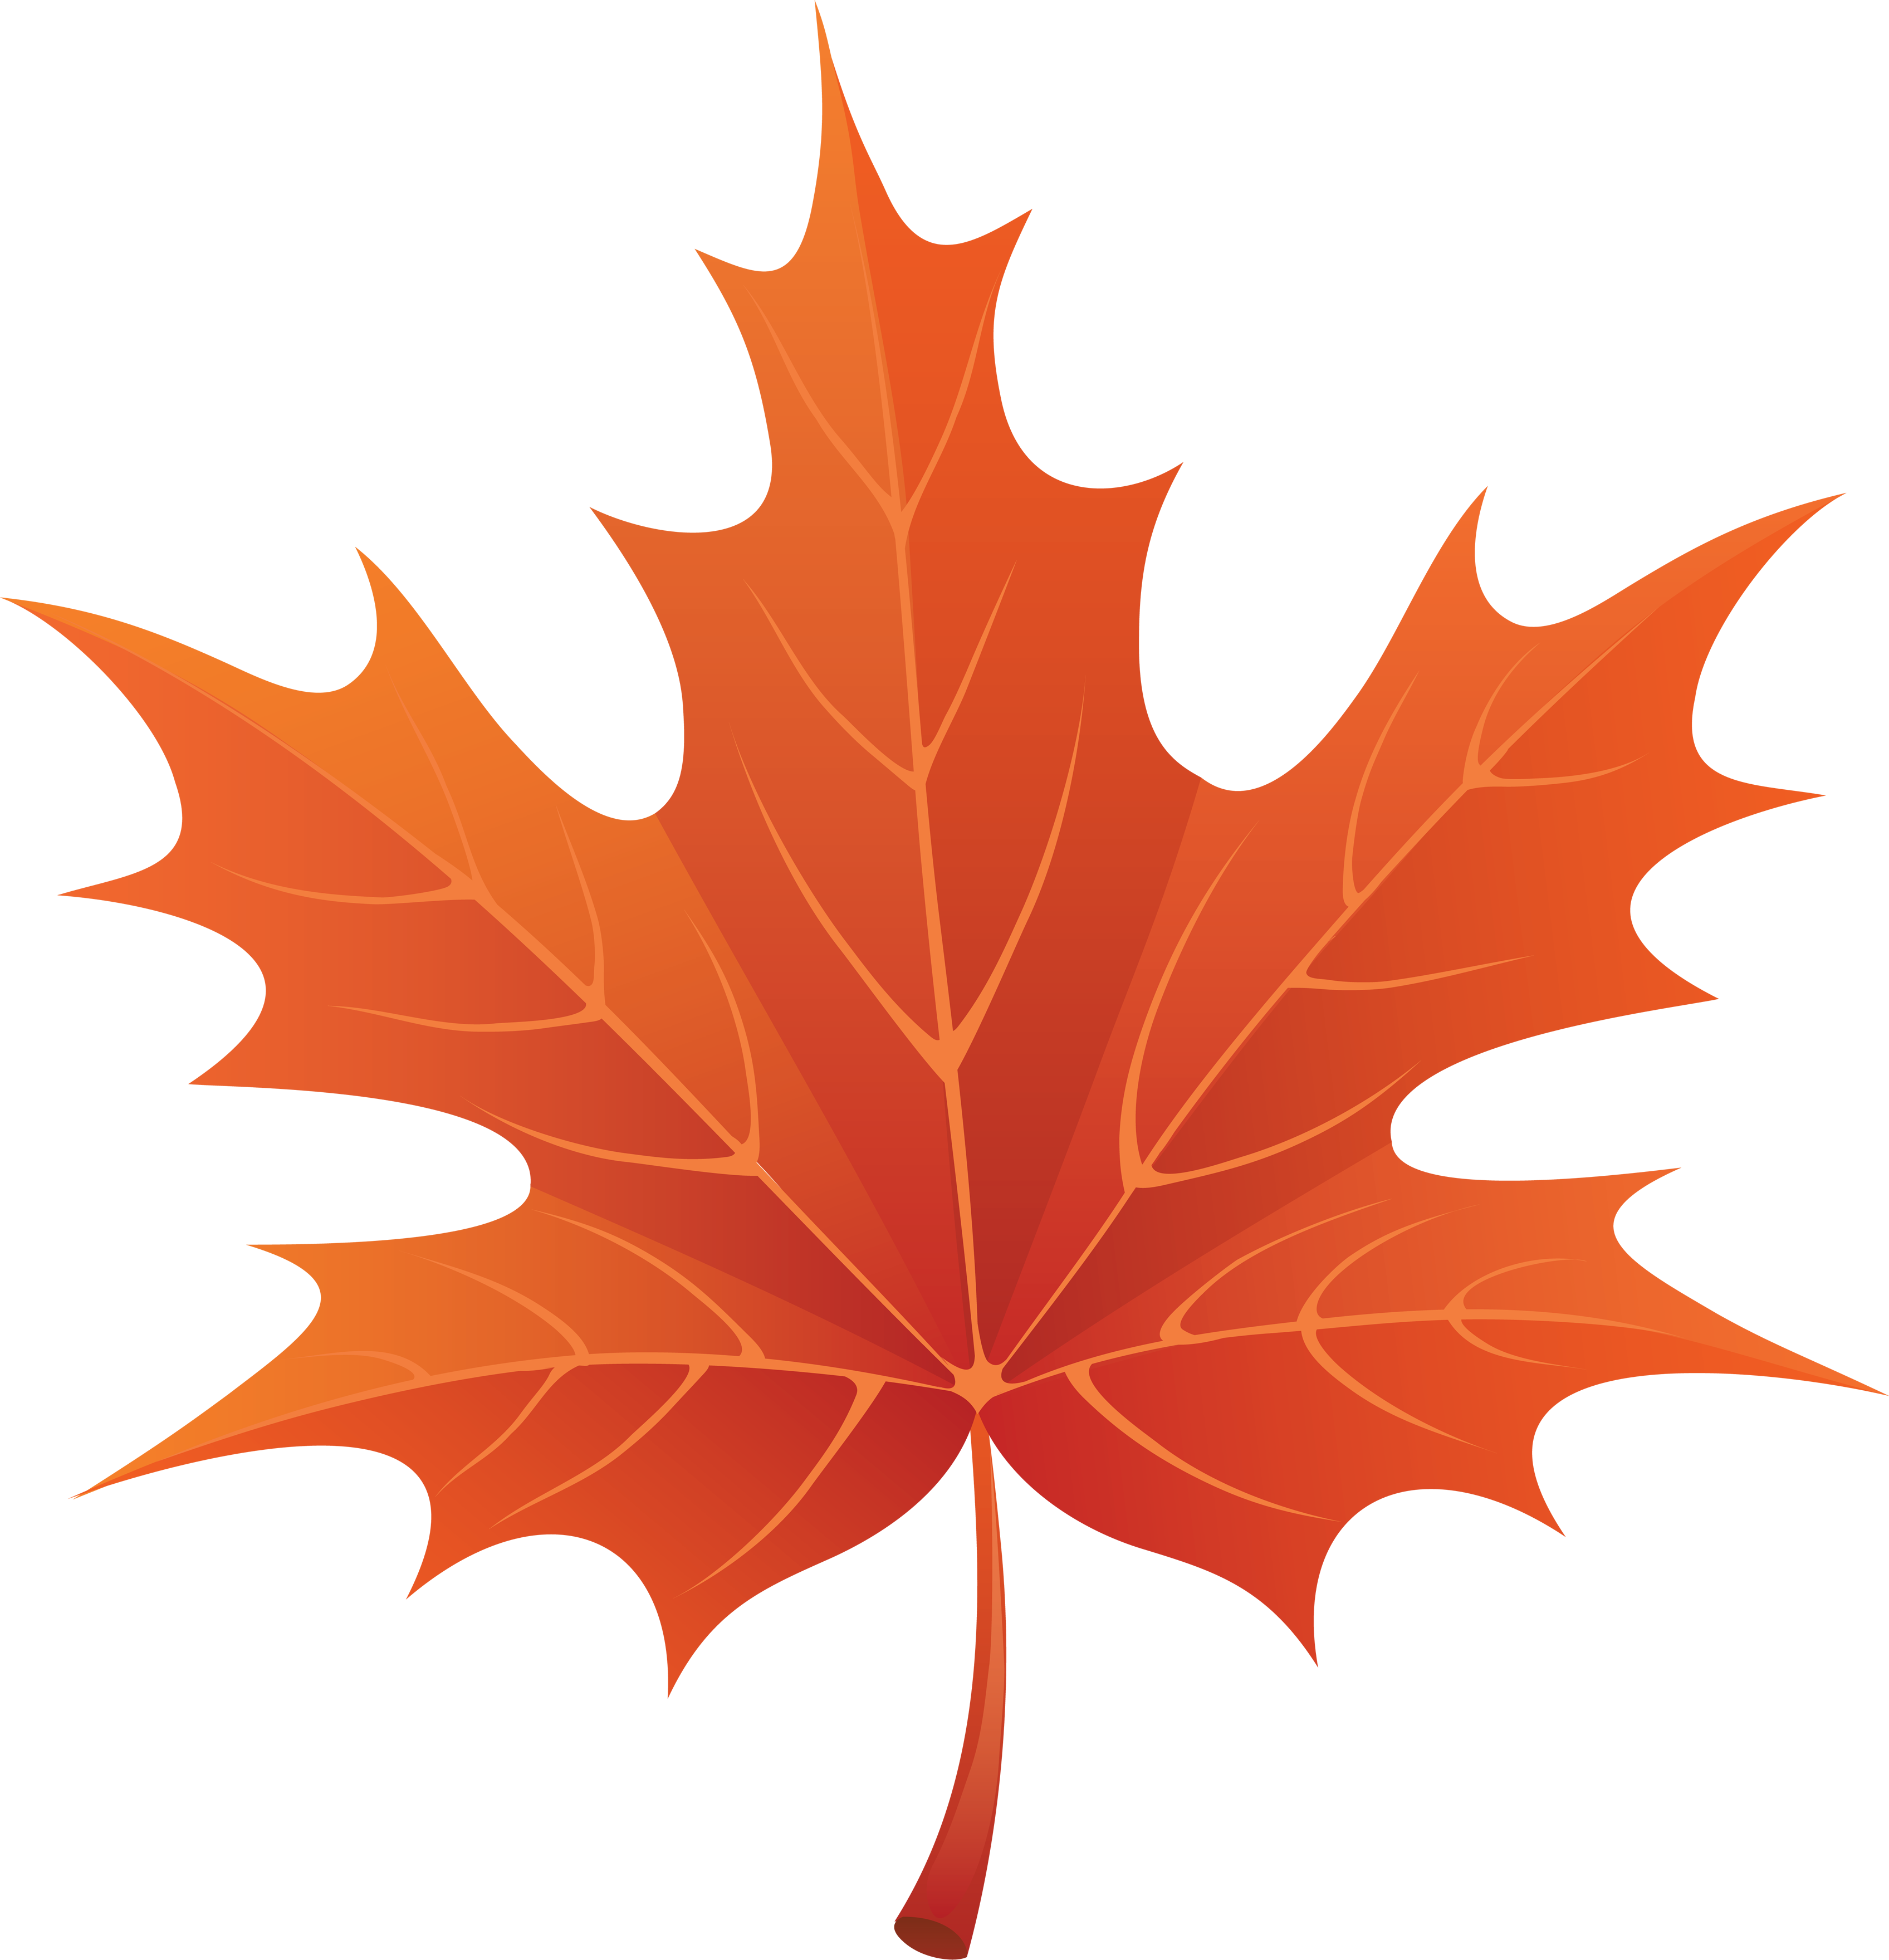 Fall leaves autumn images. Free clipart leaf